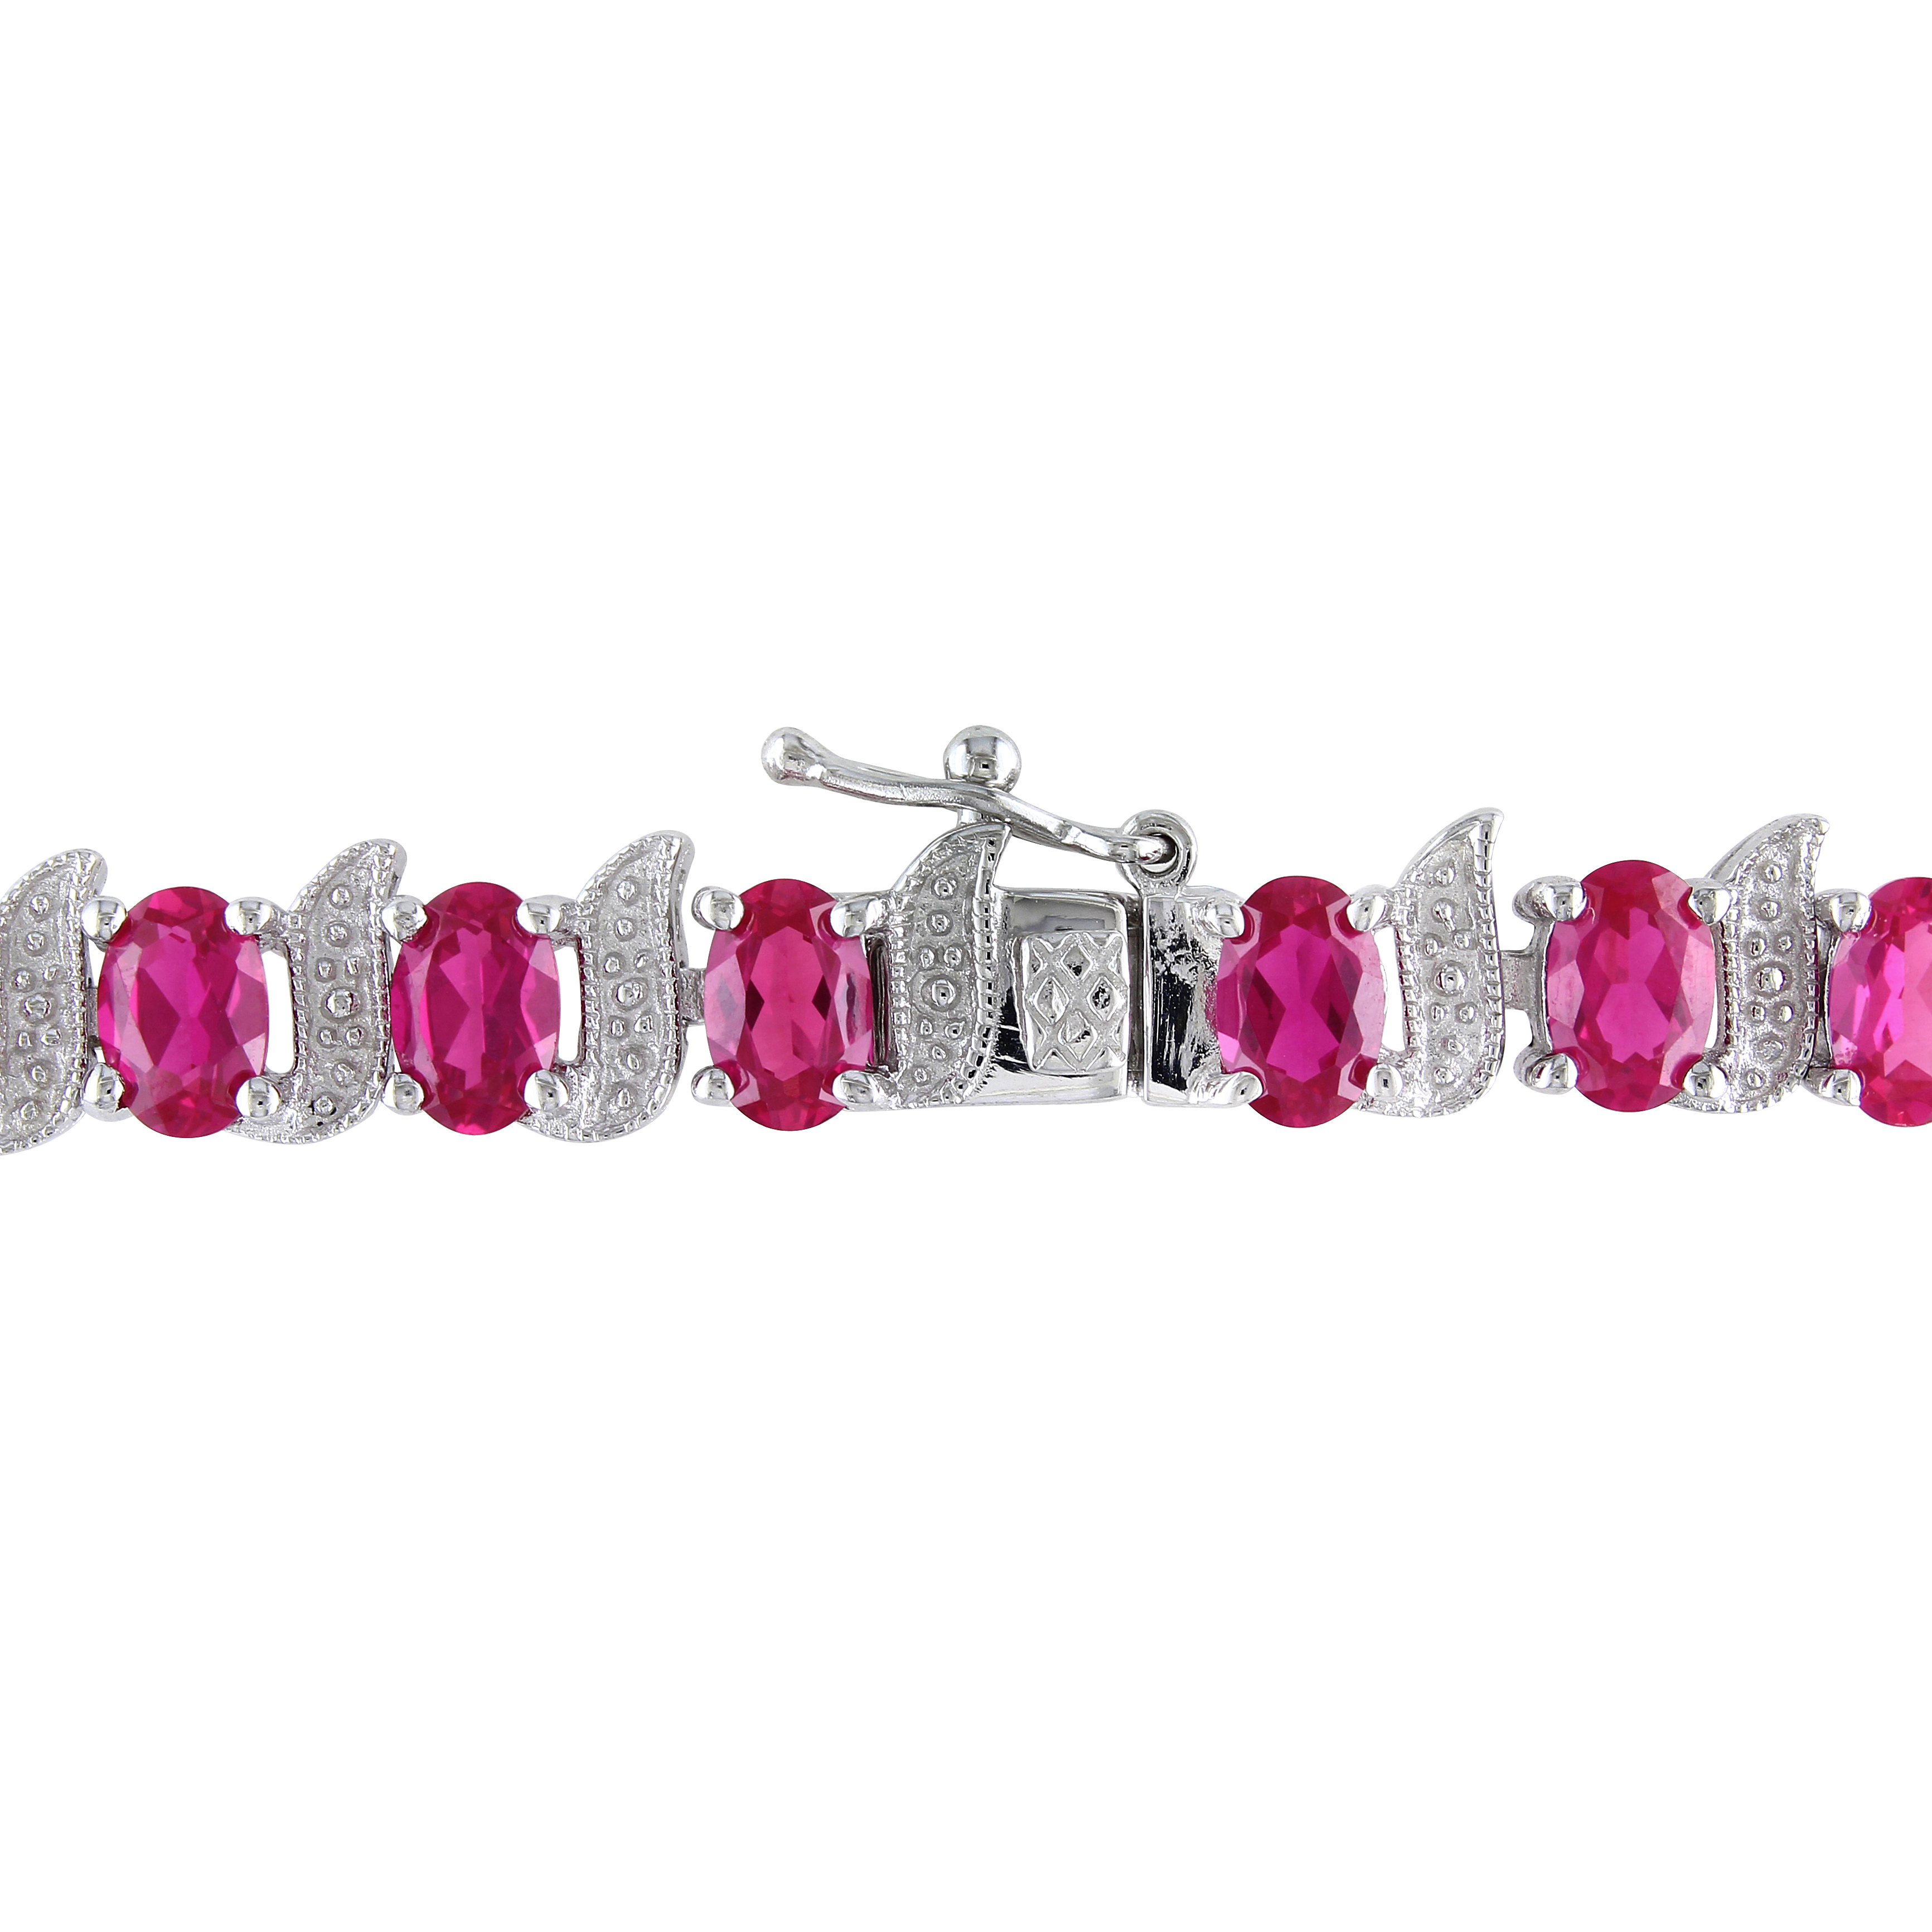 18 CT TGW Created Ruby and Diamond S-Link Bracelet in Sterling Silver - 7 in.